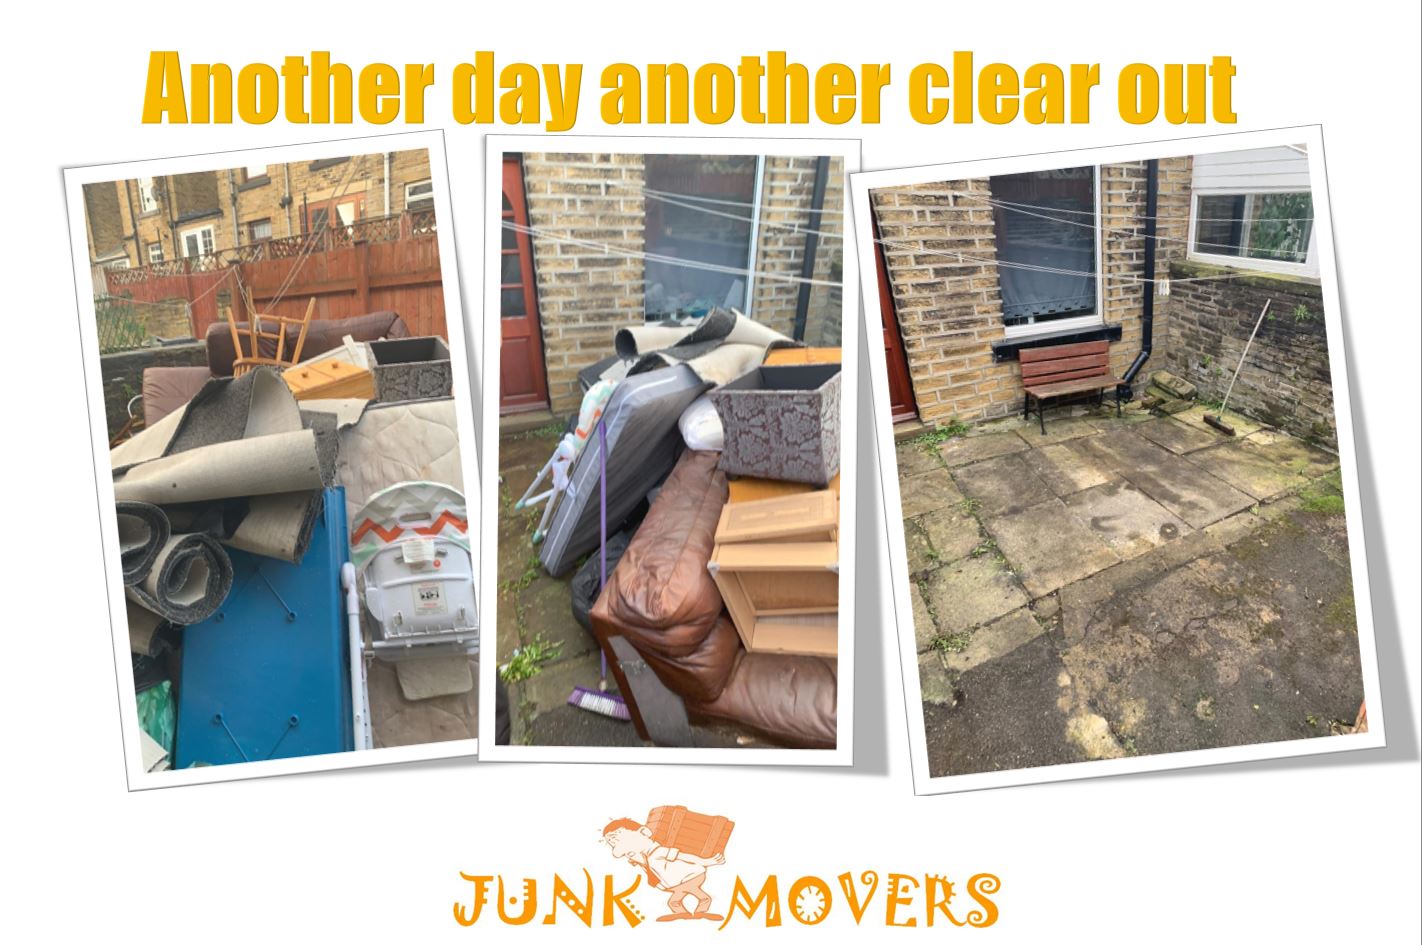 Junk Collections Brighouse, Junk Movers West Yorkshire Ltd